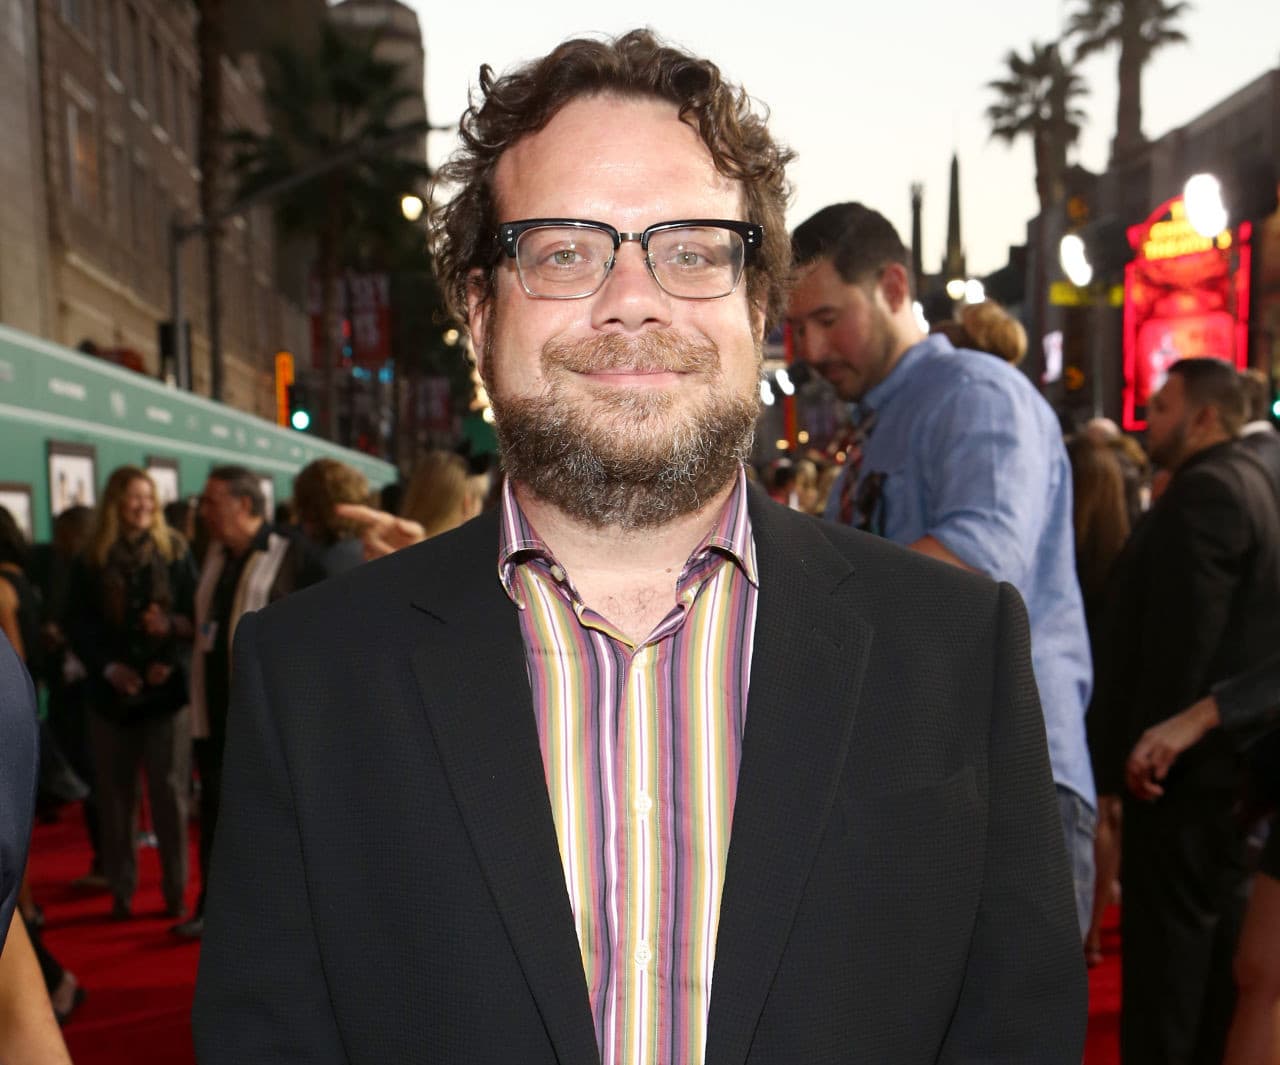 Composer Christophe Beck attends The World Premiere of Disney's 'Alexander and the Terrible, Horrible, No Good, Very Bad Day' at the El Capitan Theatre on October 6, 2014 in Hollywood, California. (Rich Polk/Getty Images for Disney)